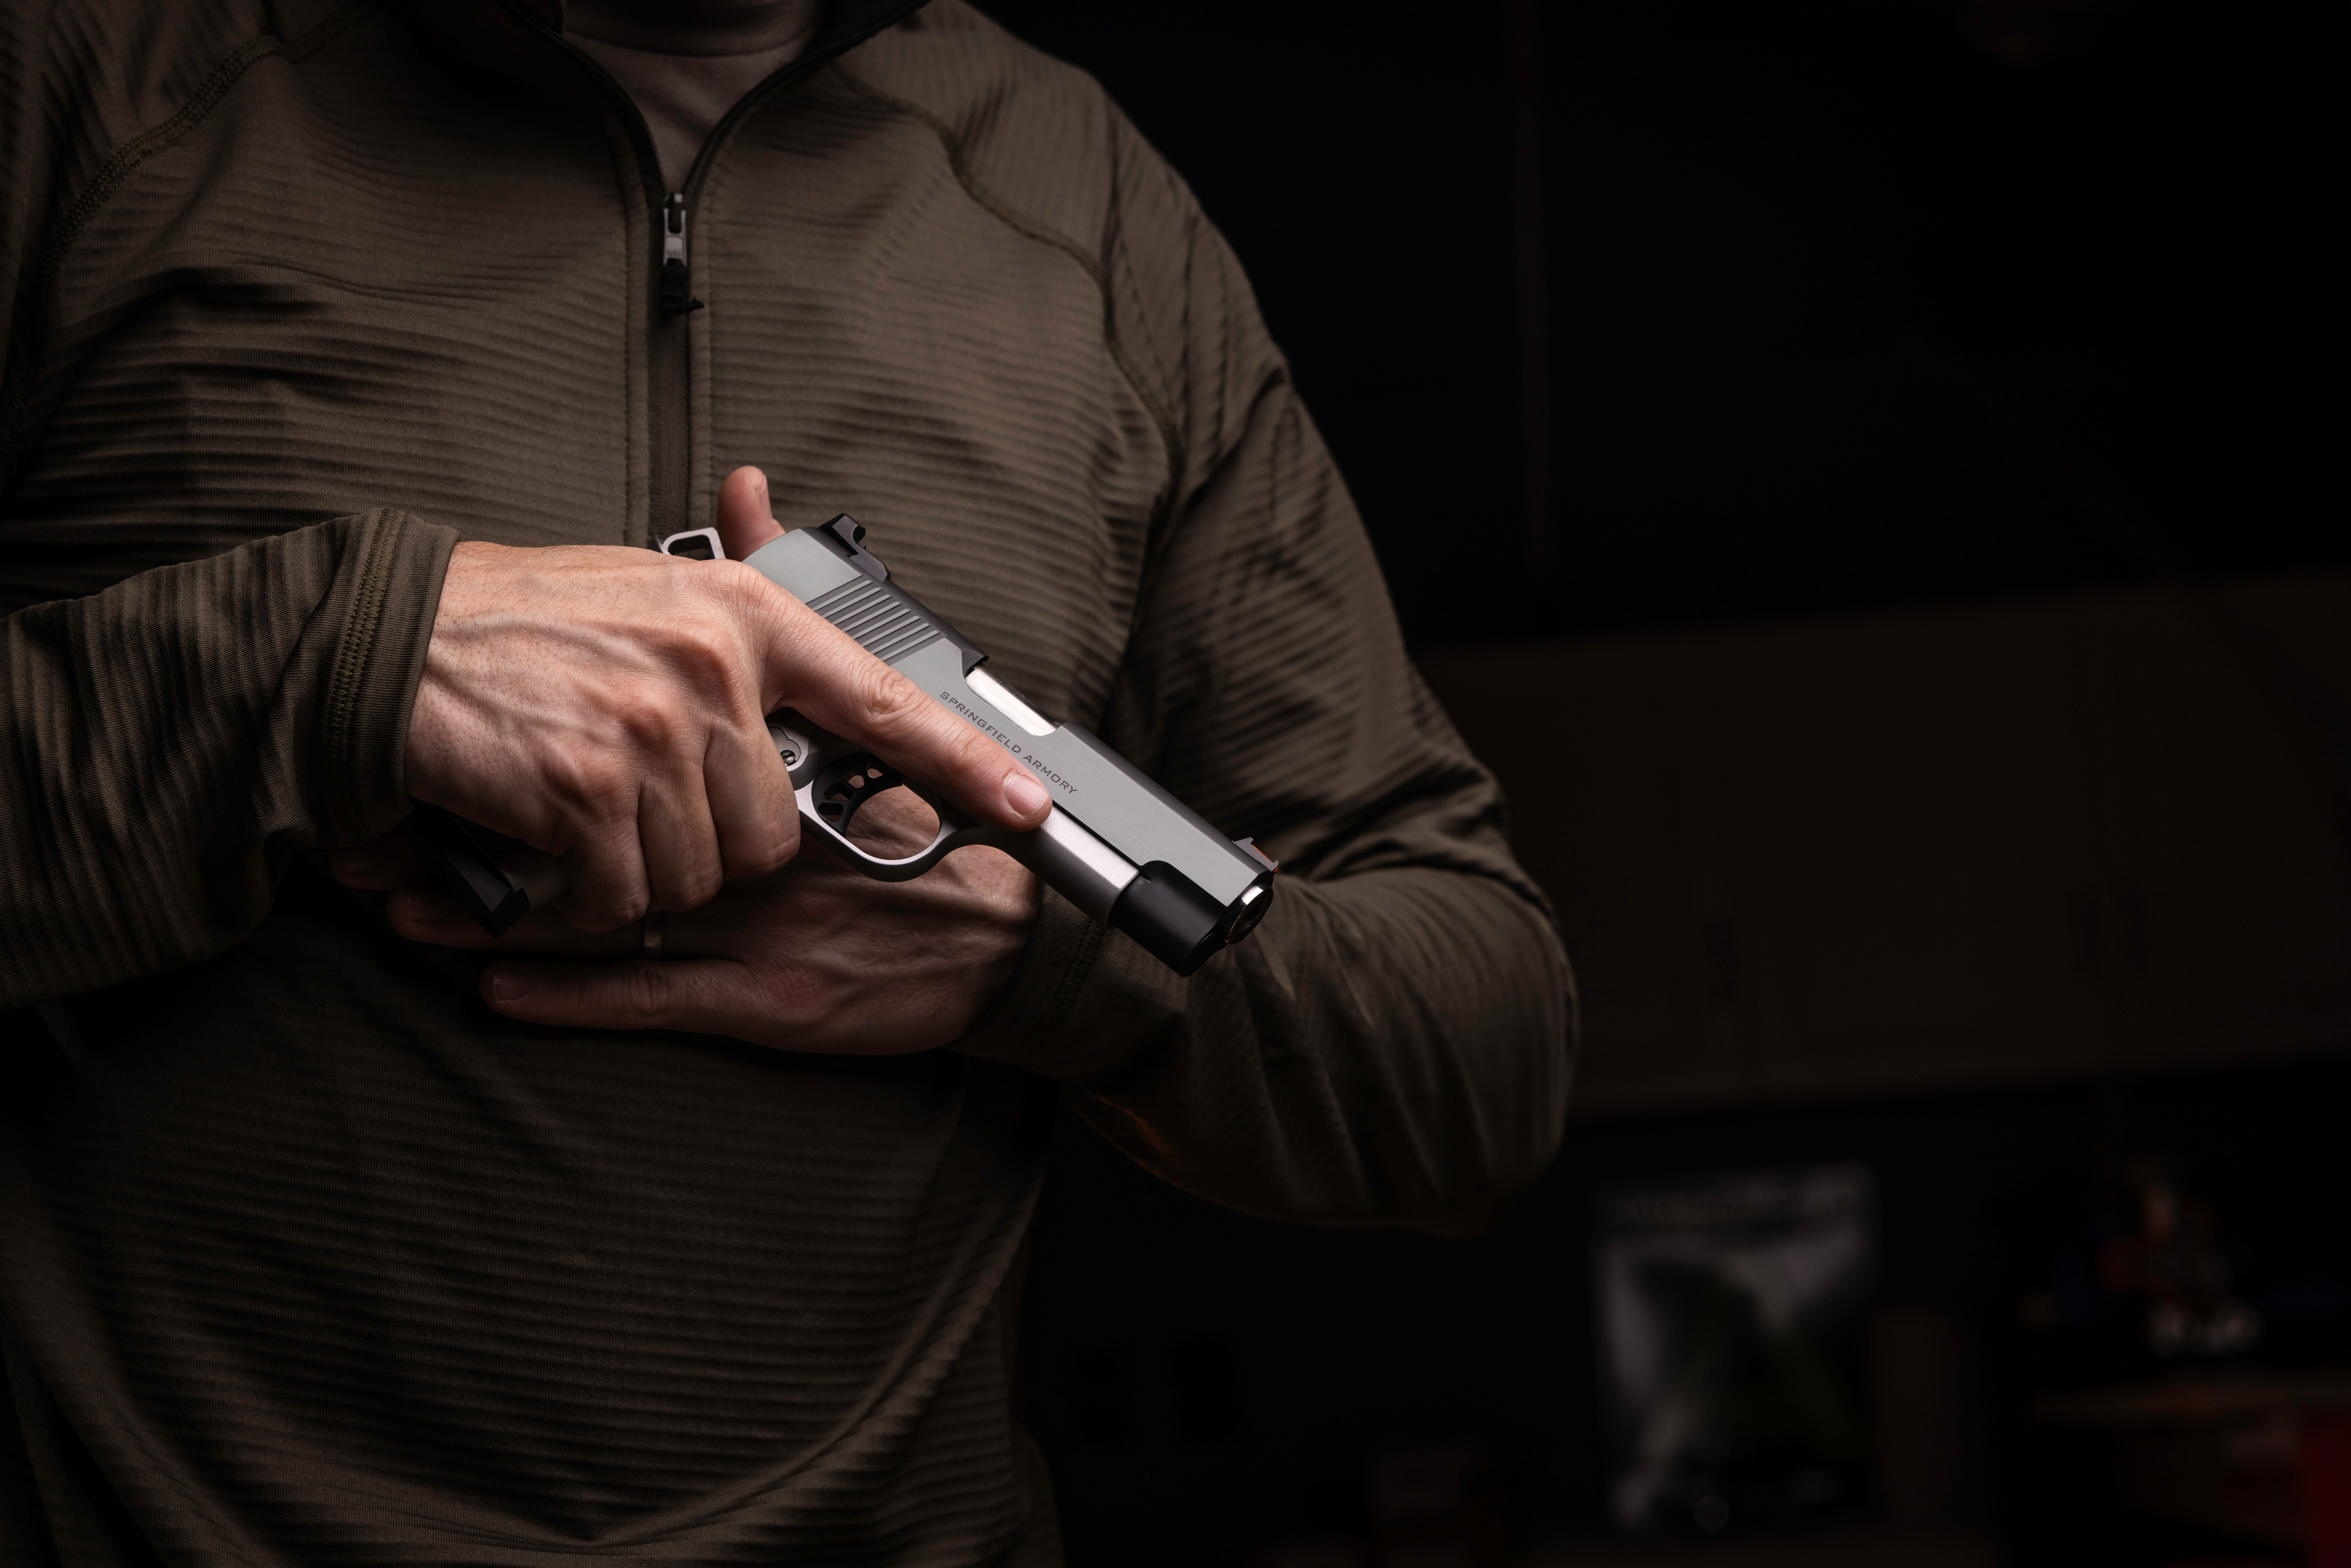 The New Ronin EMP 1911 Pistol from Springfield Armory